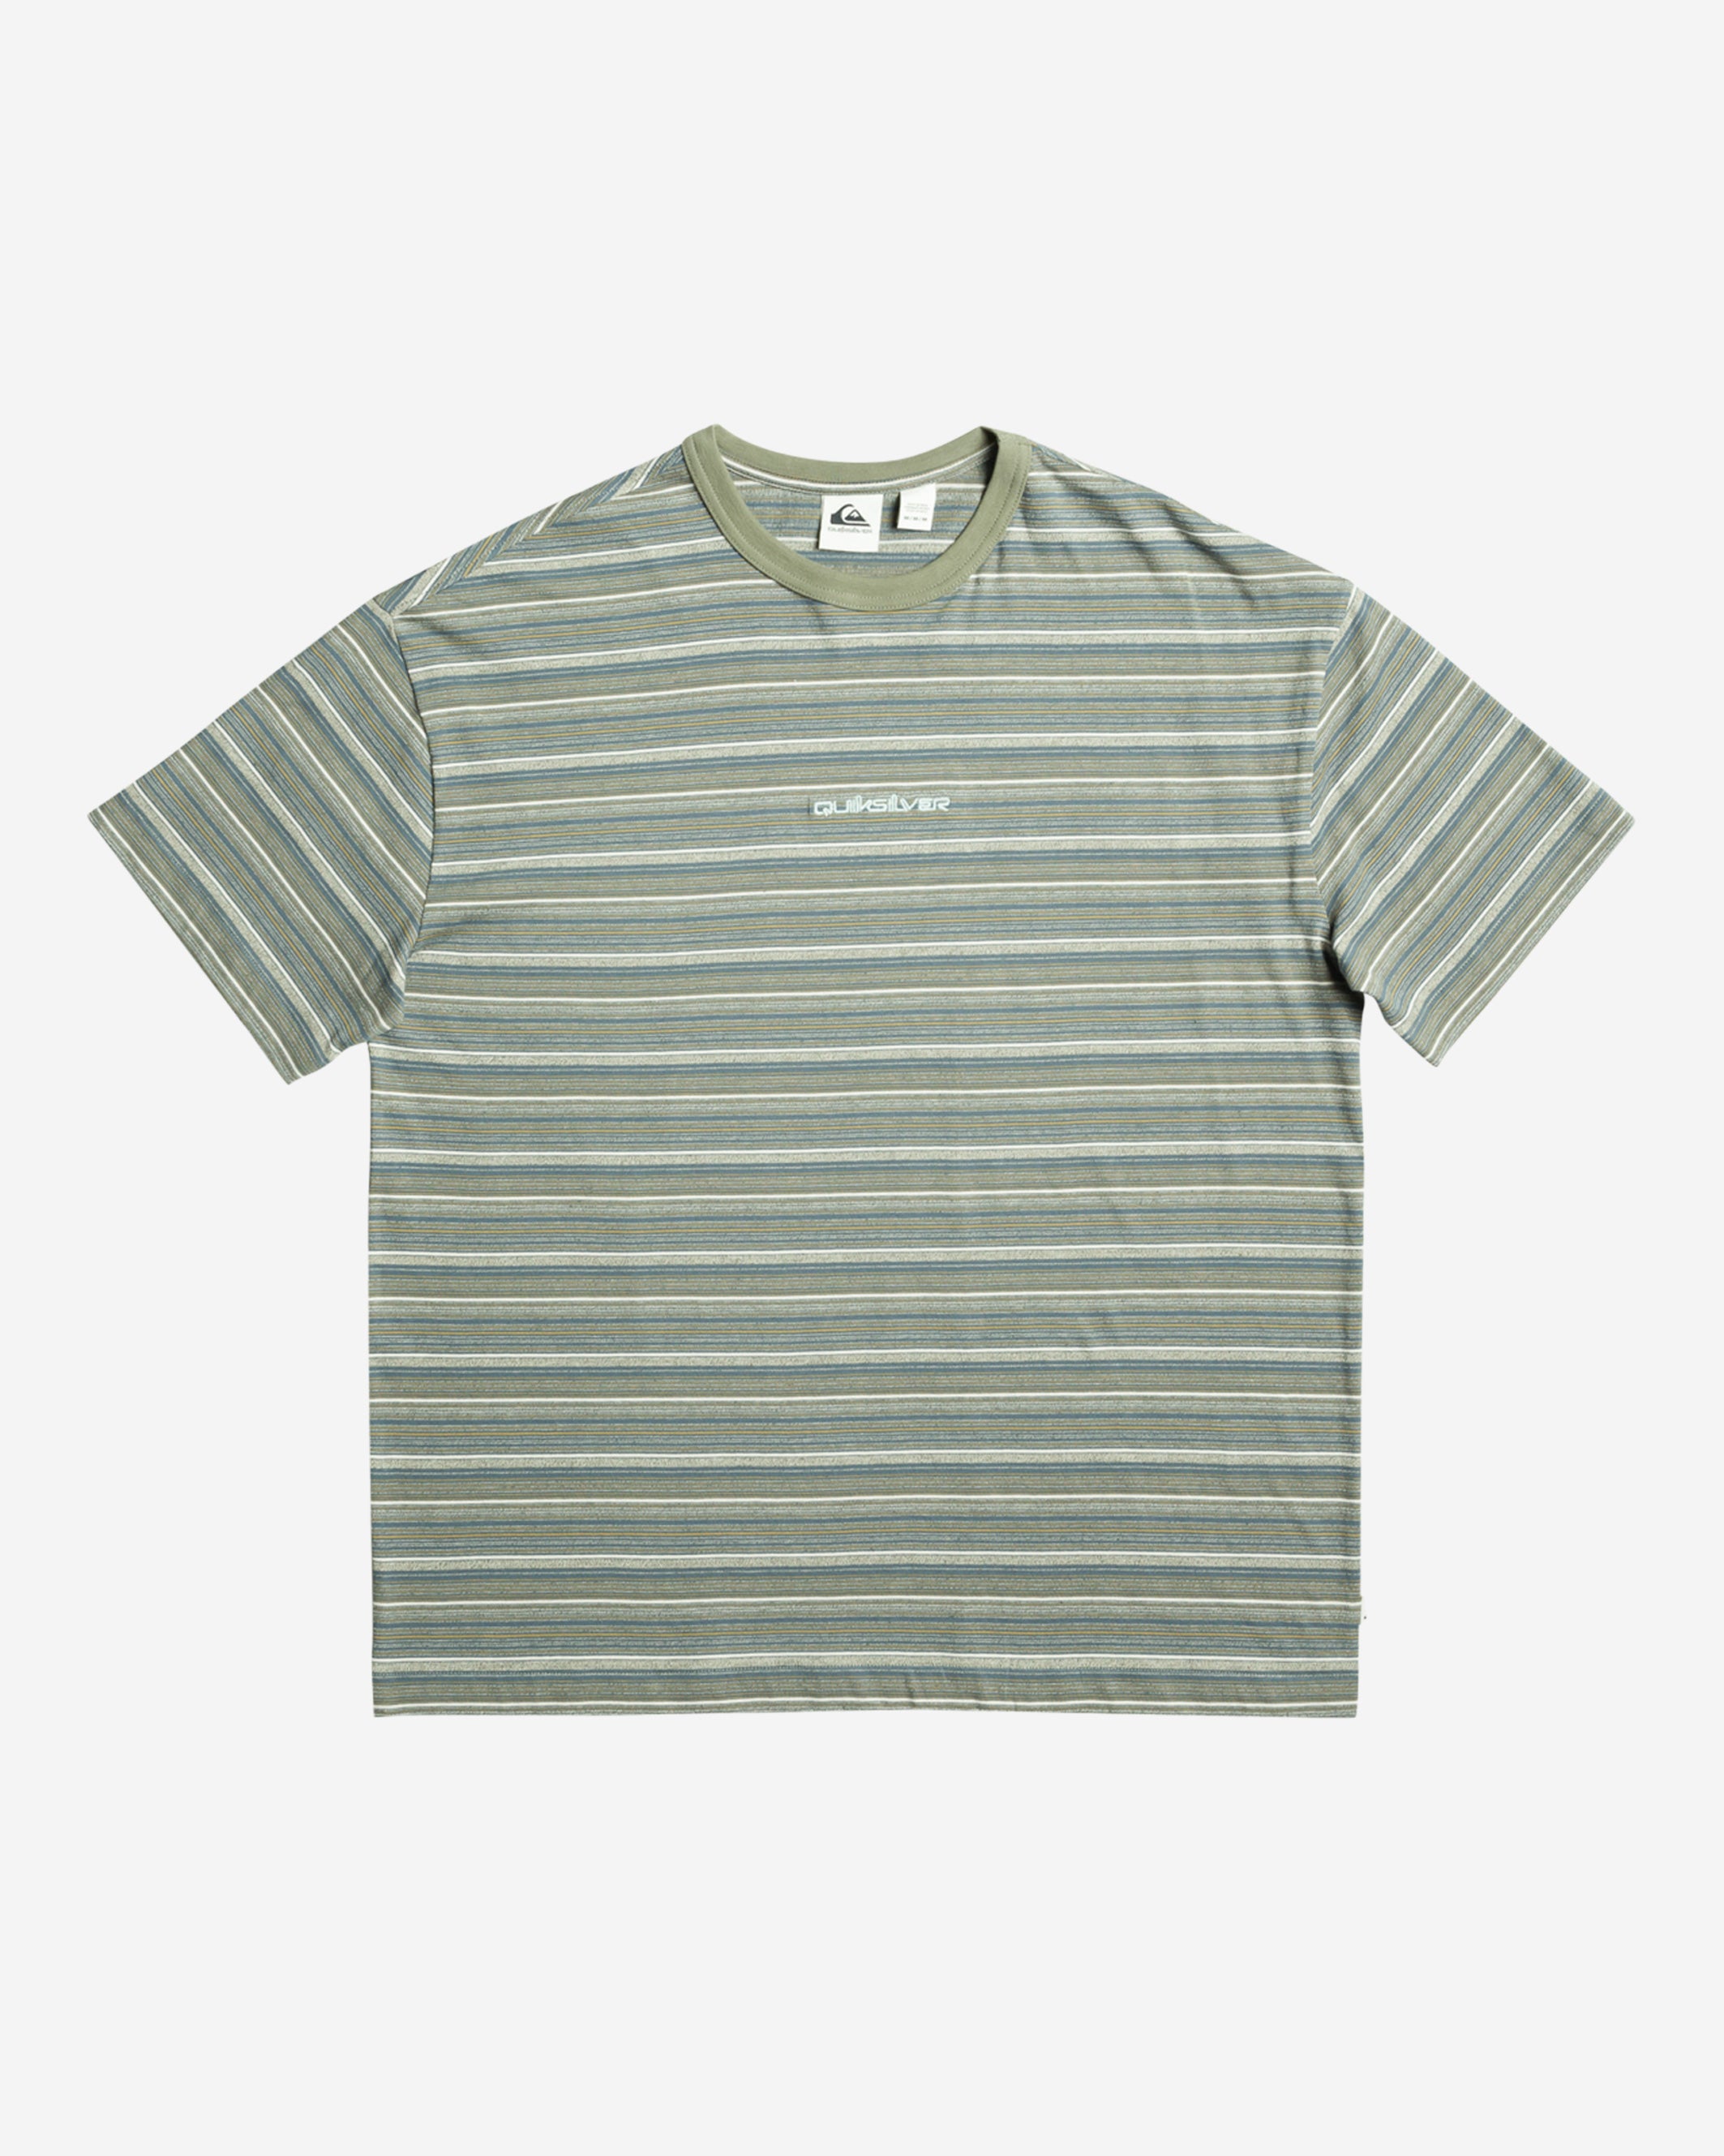 Made of pure cotton fabric with yarn-dyed stripes, this classic-fit tee features a ribbed neckline and an embroidered logo on the front.